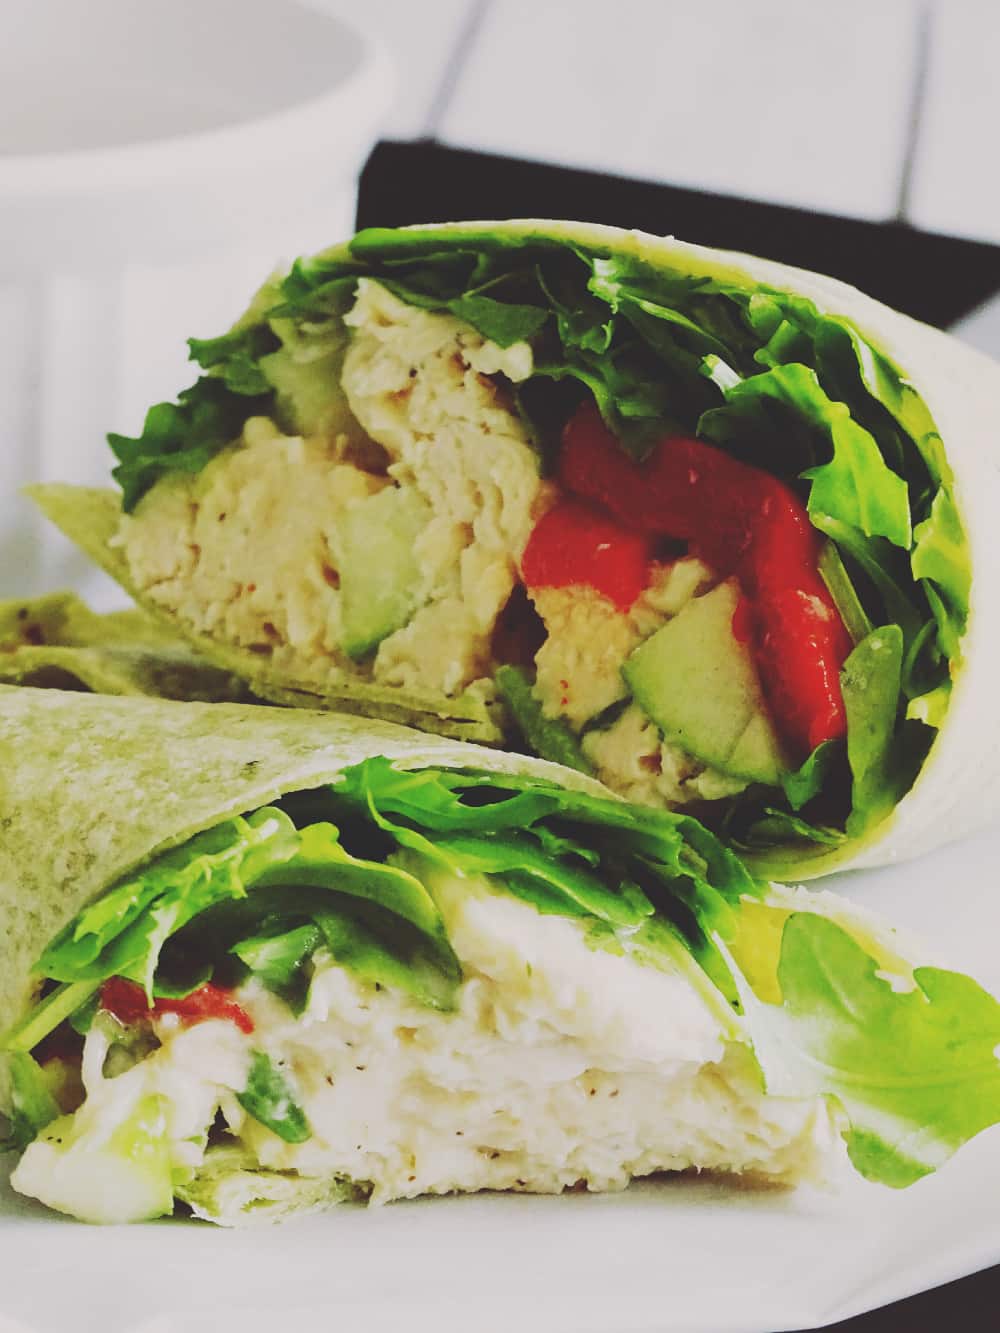 Looking for a fun way to shake things up at lunch? This Chicken and Apple Caesar Salad Wrap is the perfect option for a fun, quick meal!